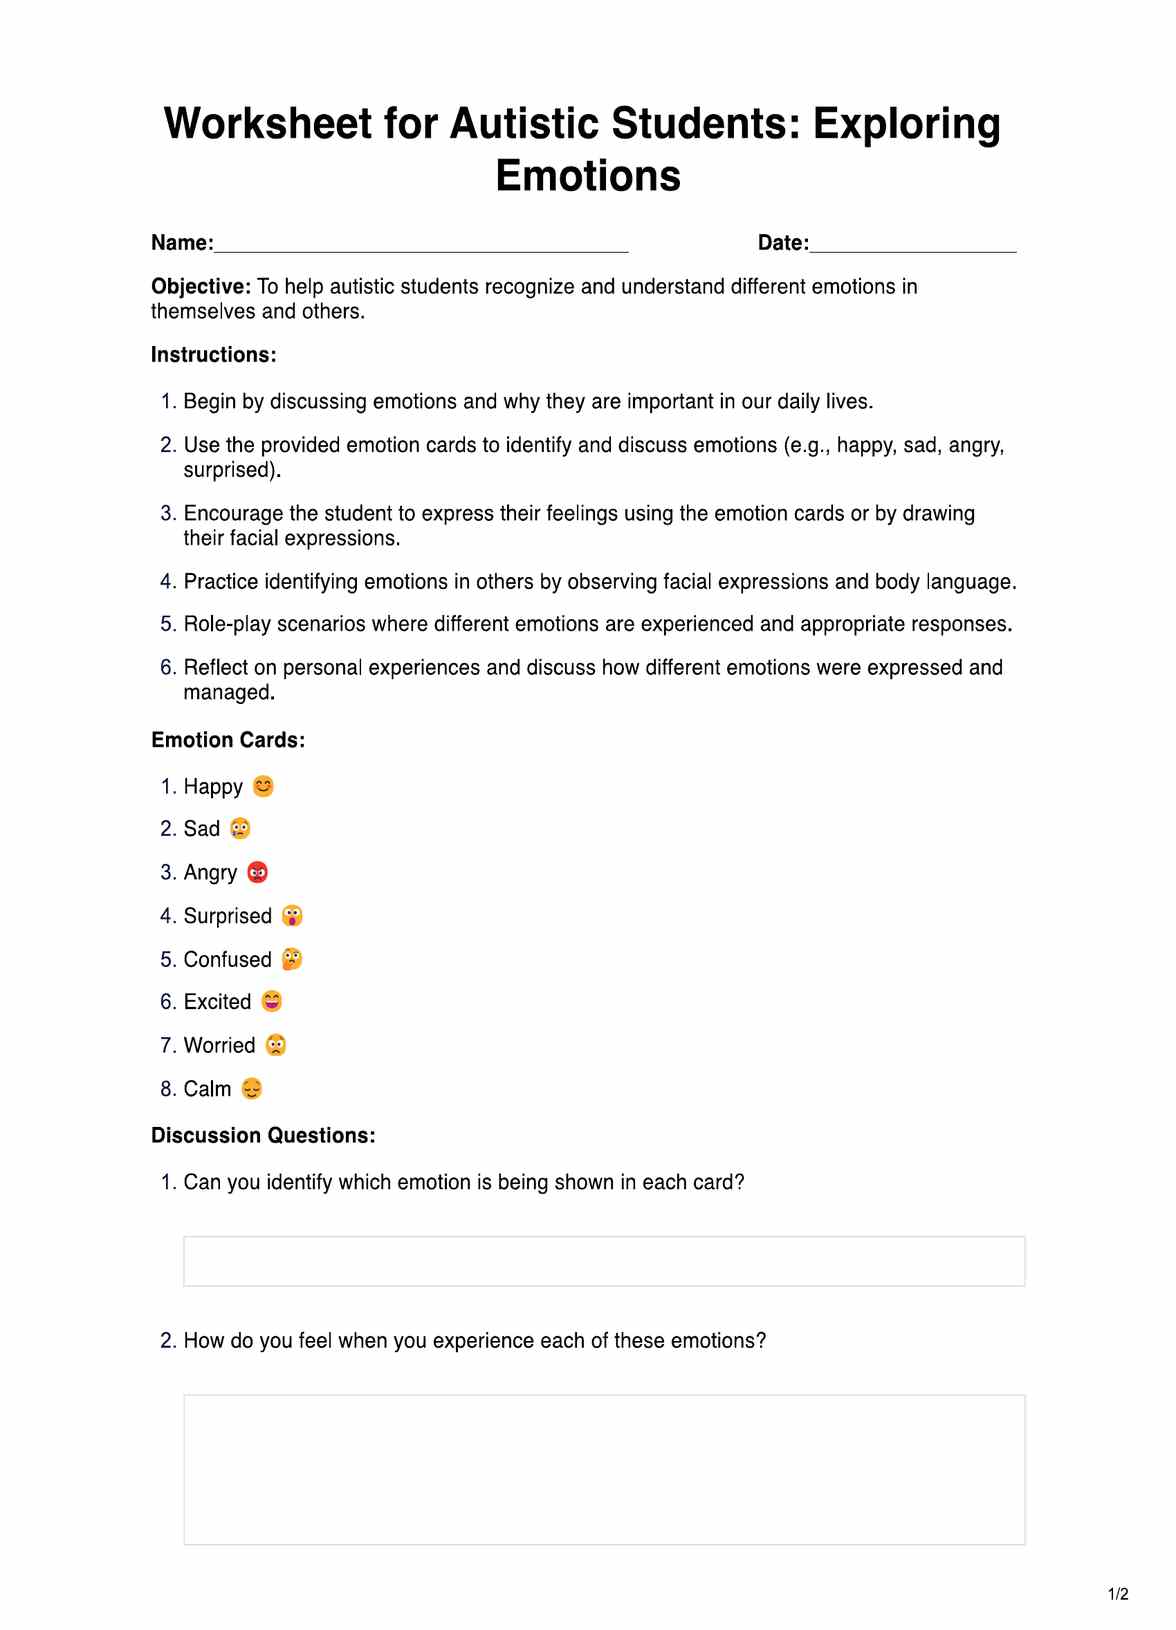 Worksheets for Autistic Students PDF Example